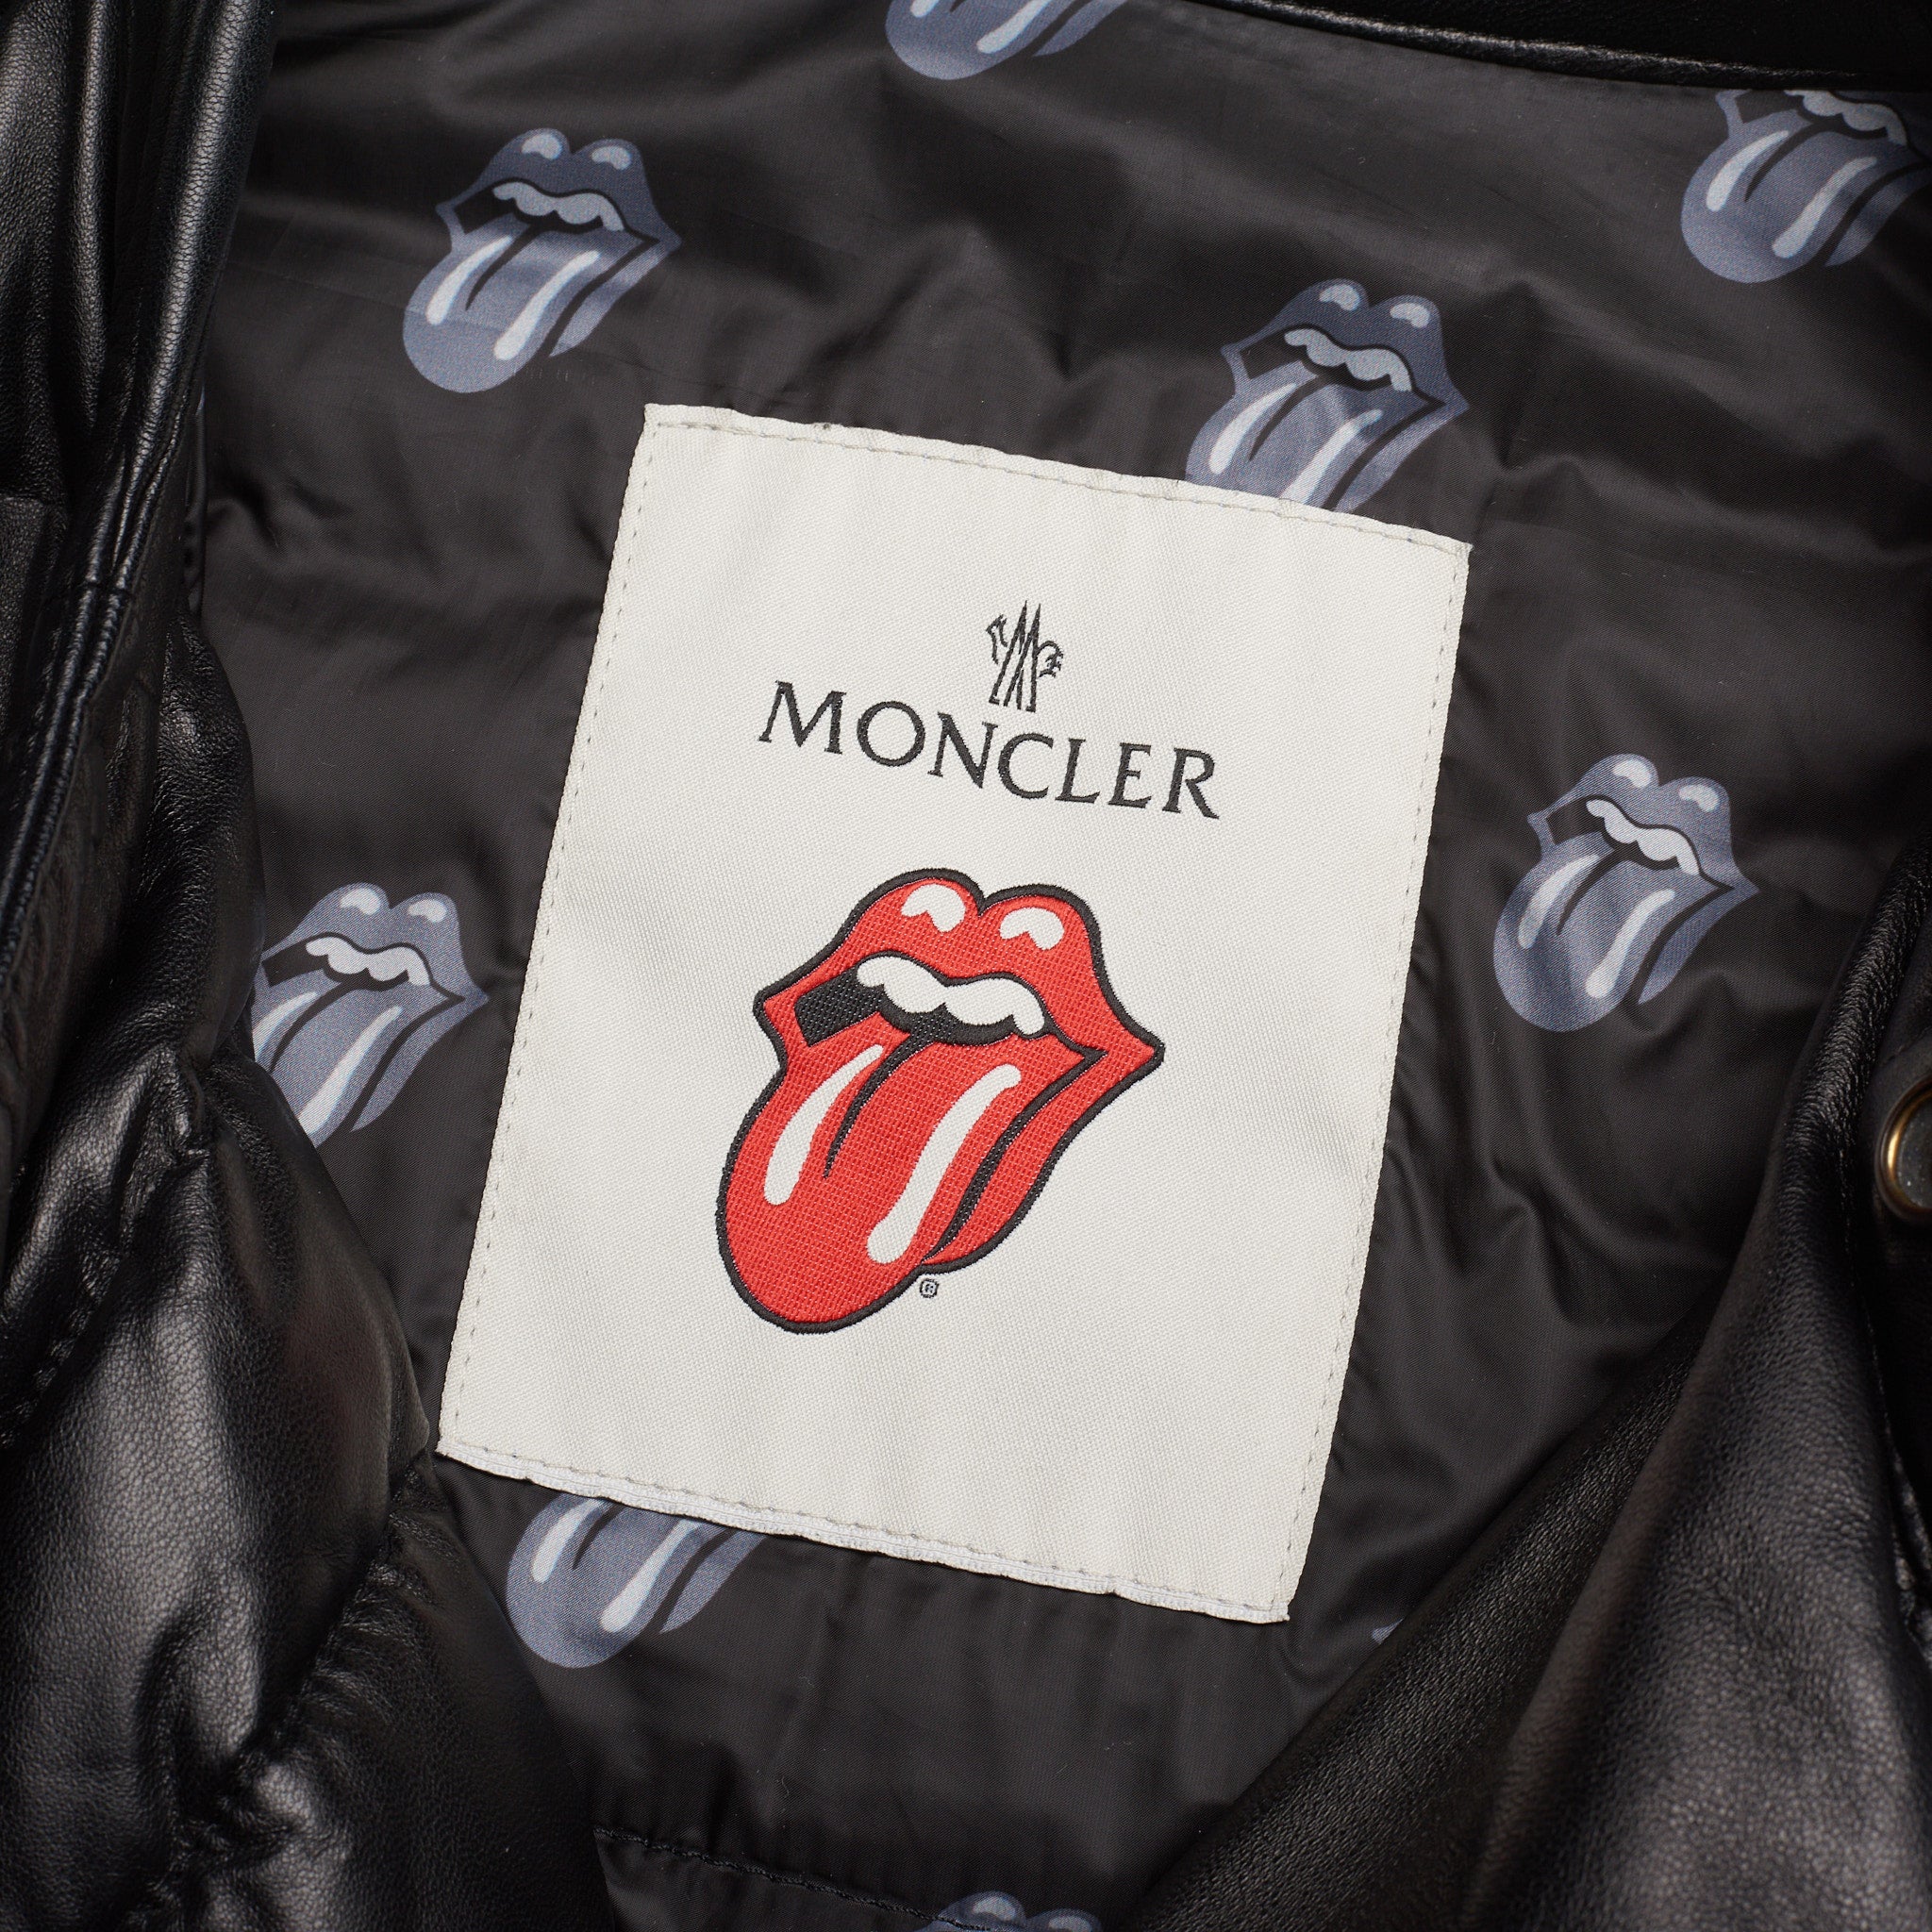 MONCLER x The Rolling Stones Capsule Collection Leather Biker Jacket Size 2 / M MONCLER